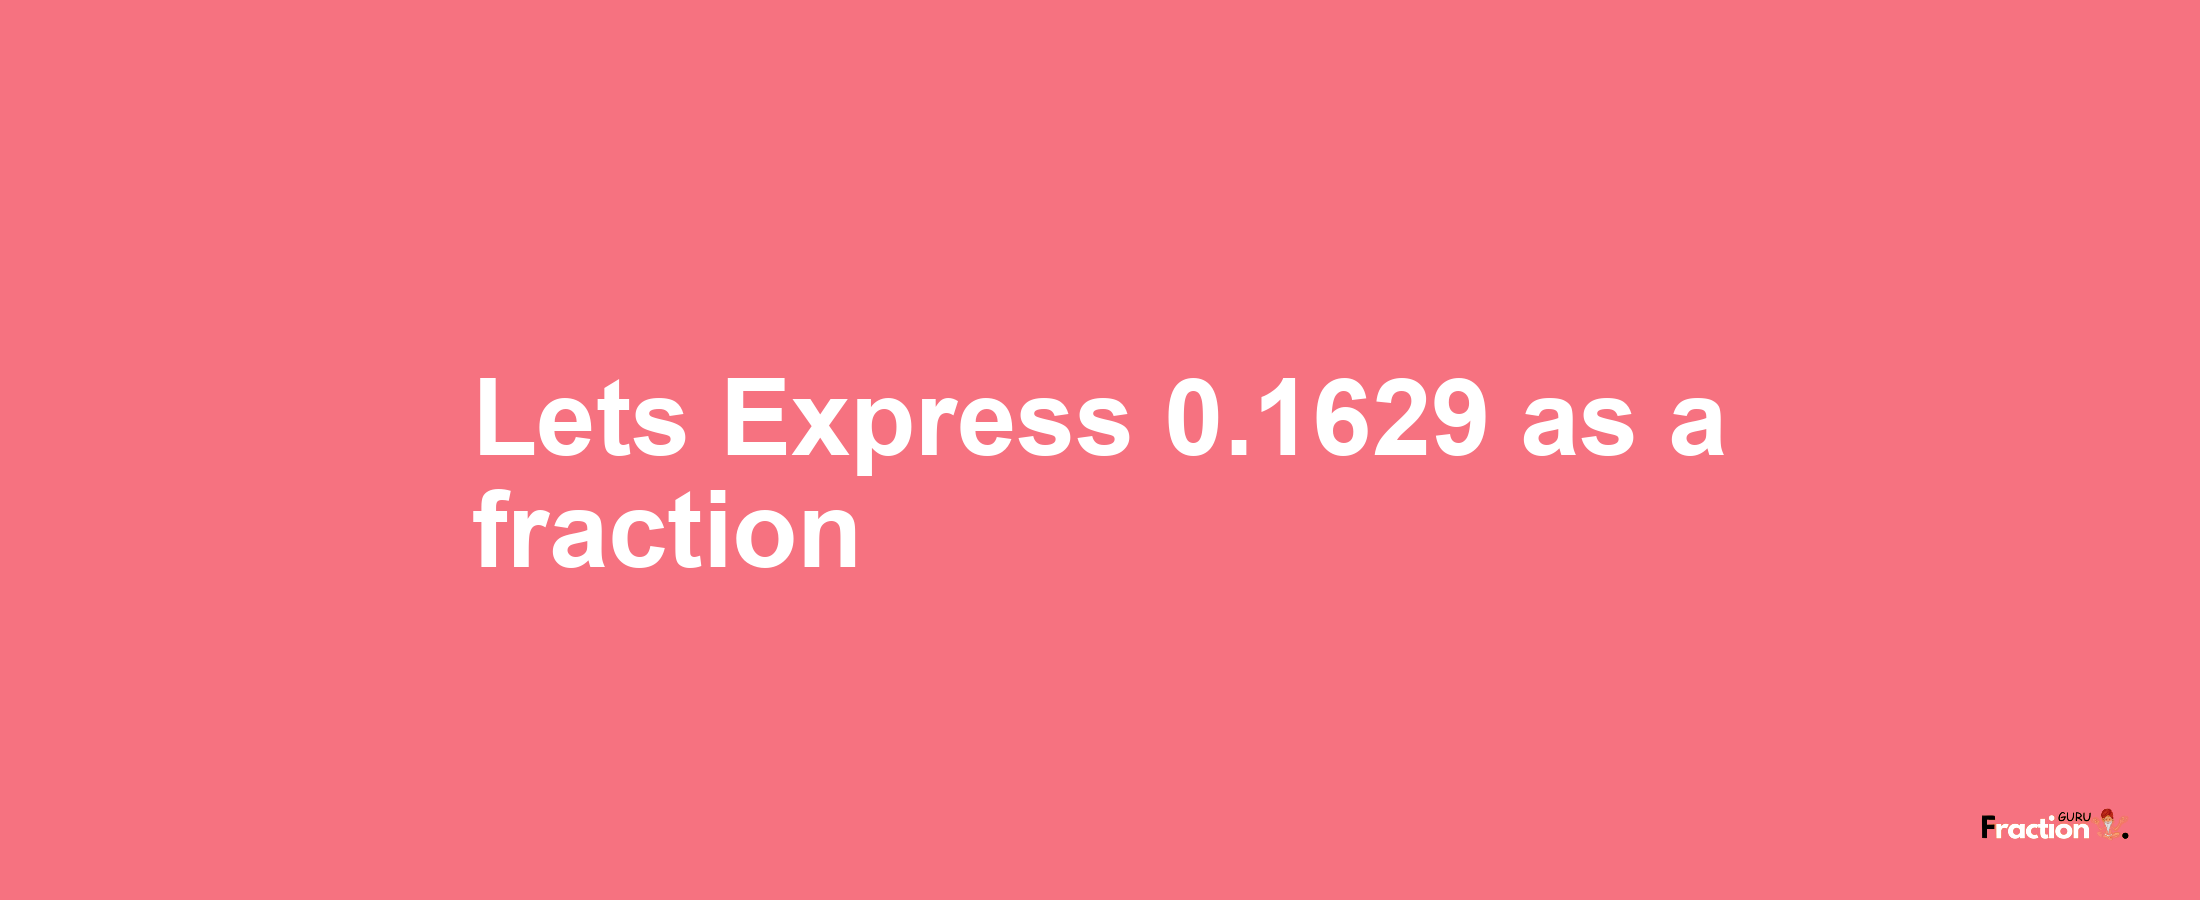 Lets Express 0.1629 as afraction